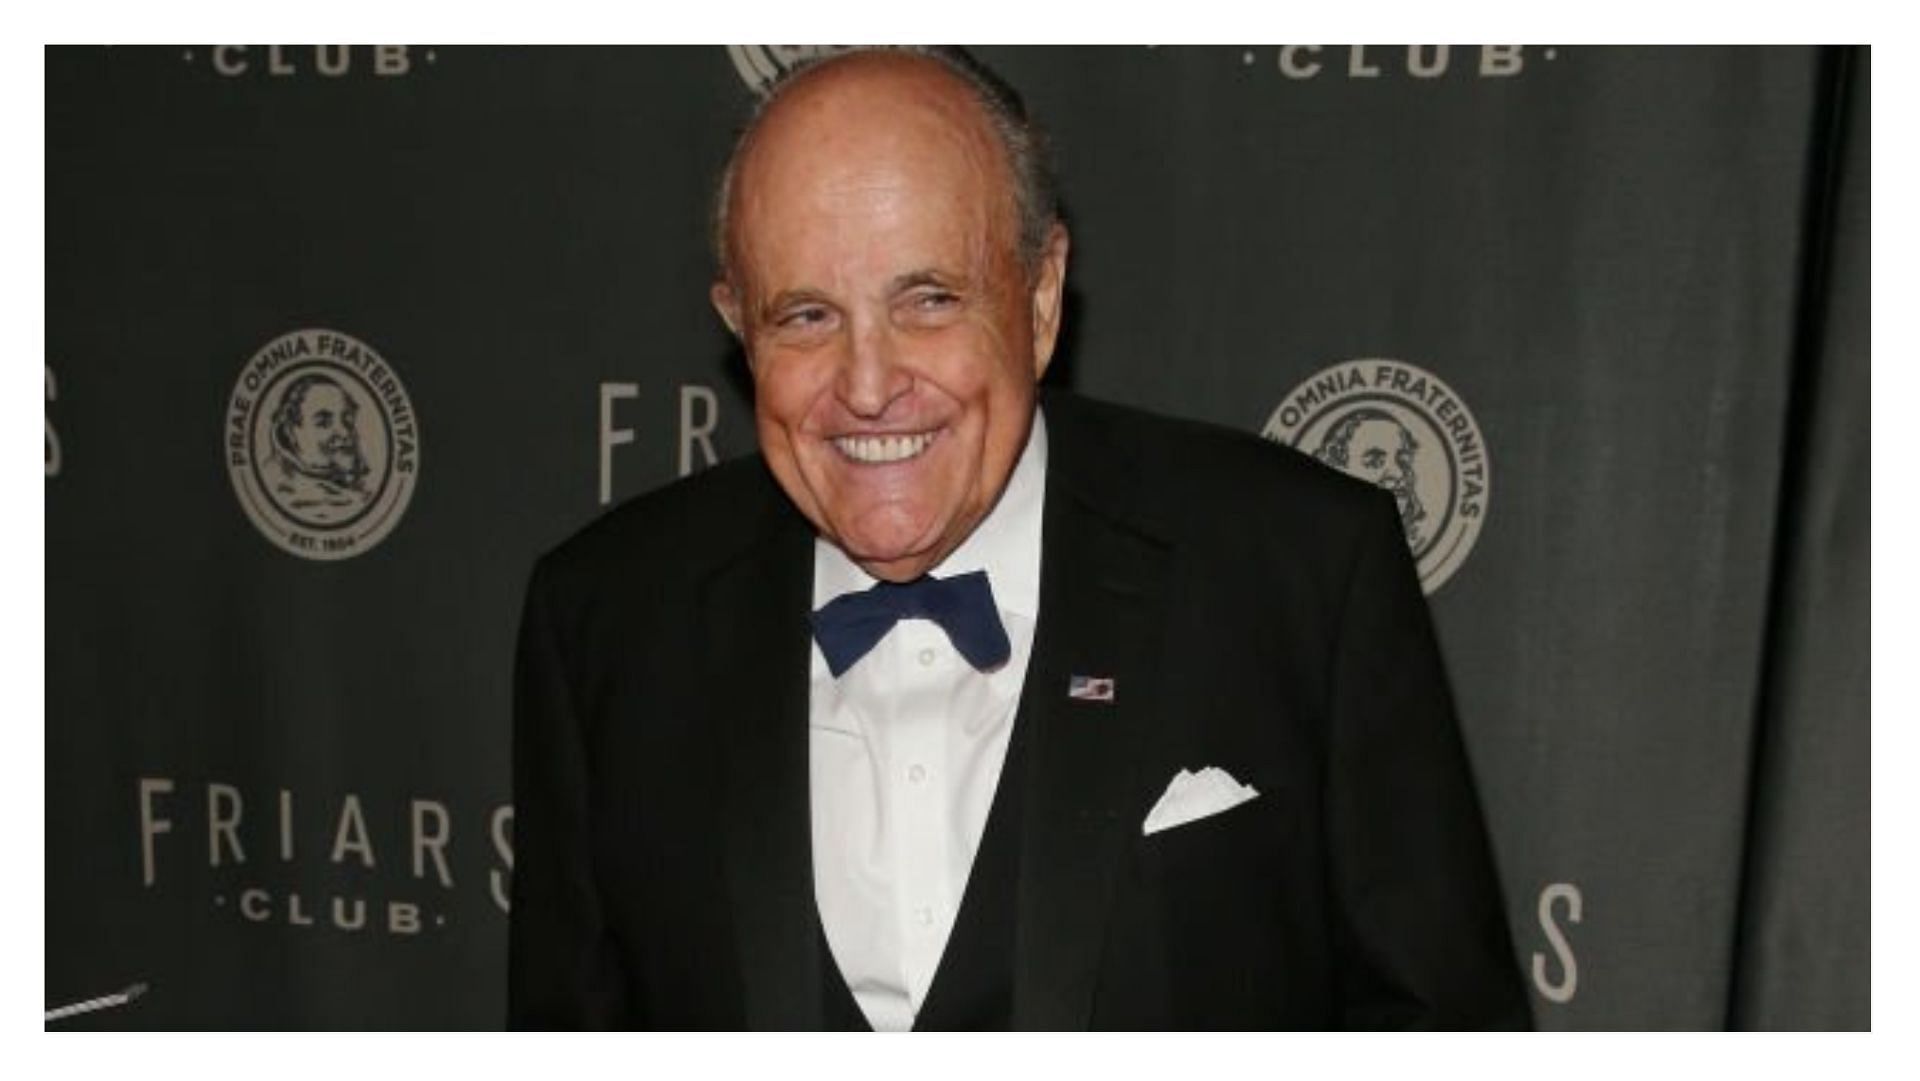 Rudy Giuliani was slapped by a store employee (Image via Rob Kim/Getty Images)